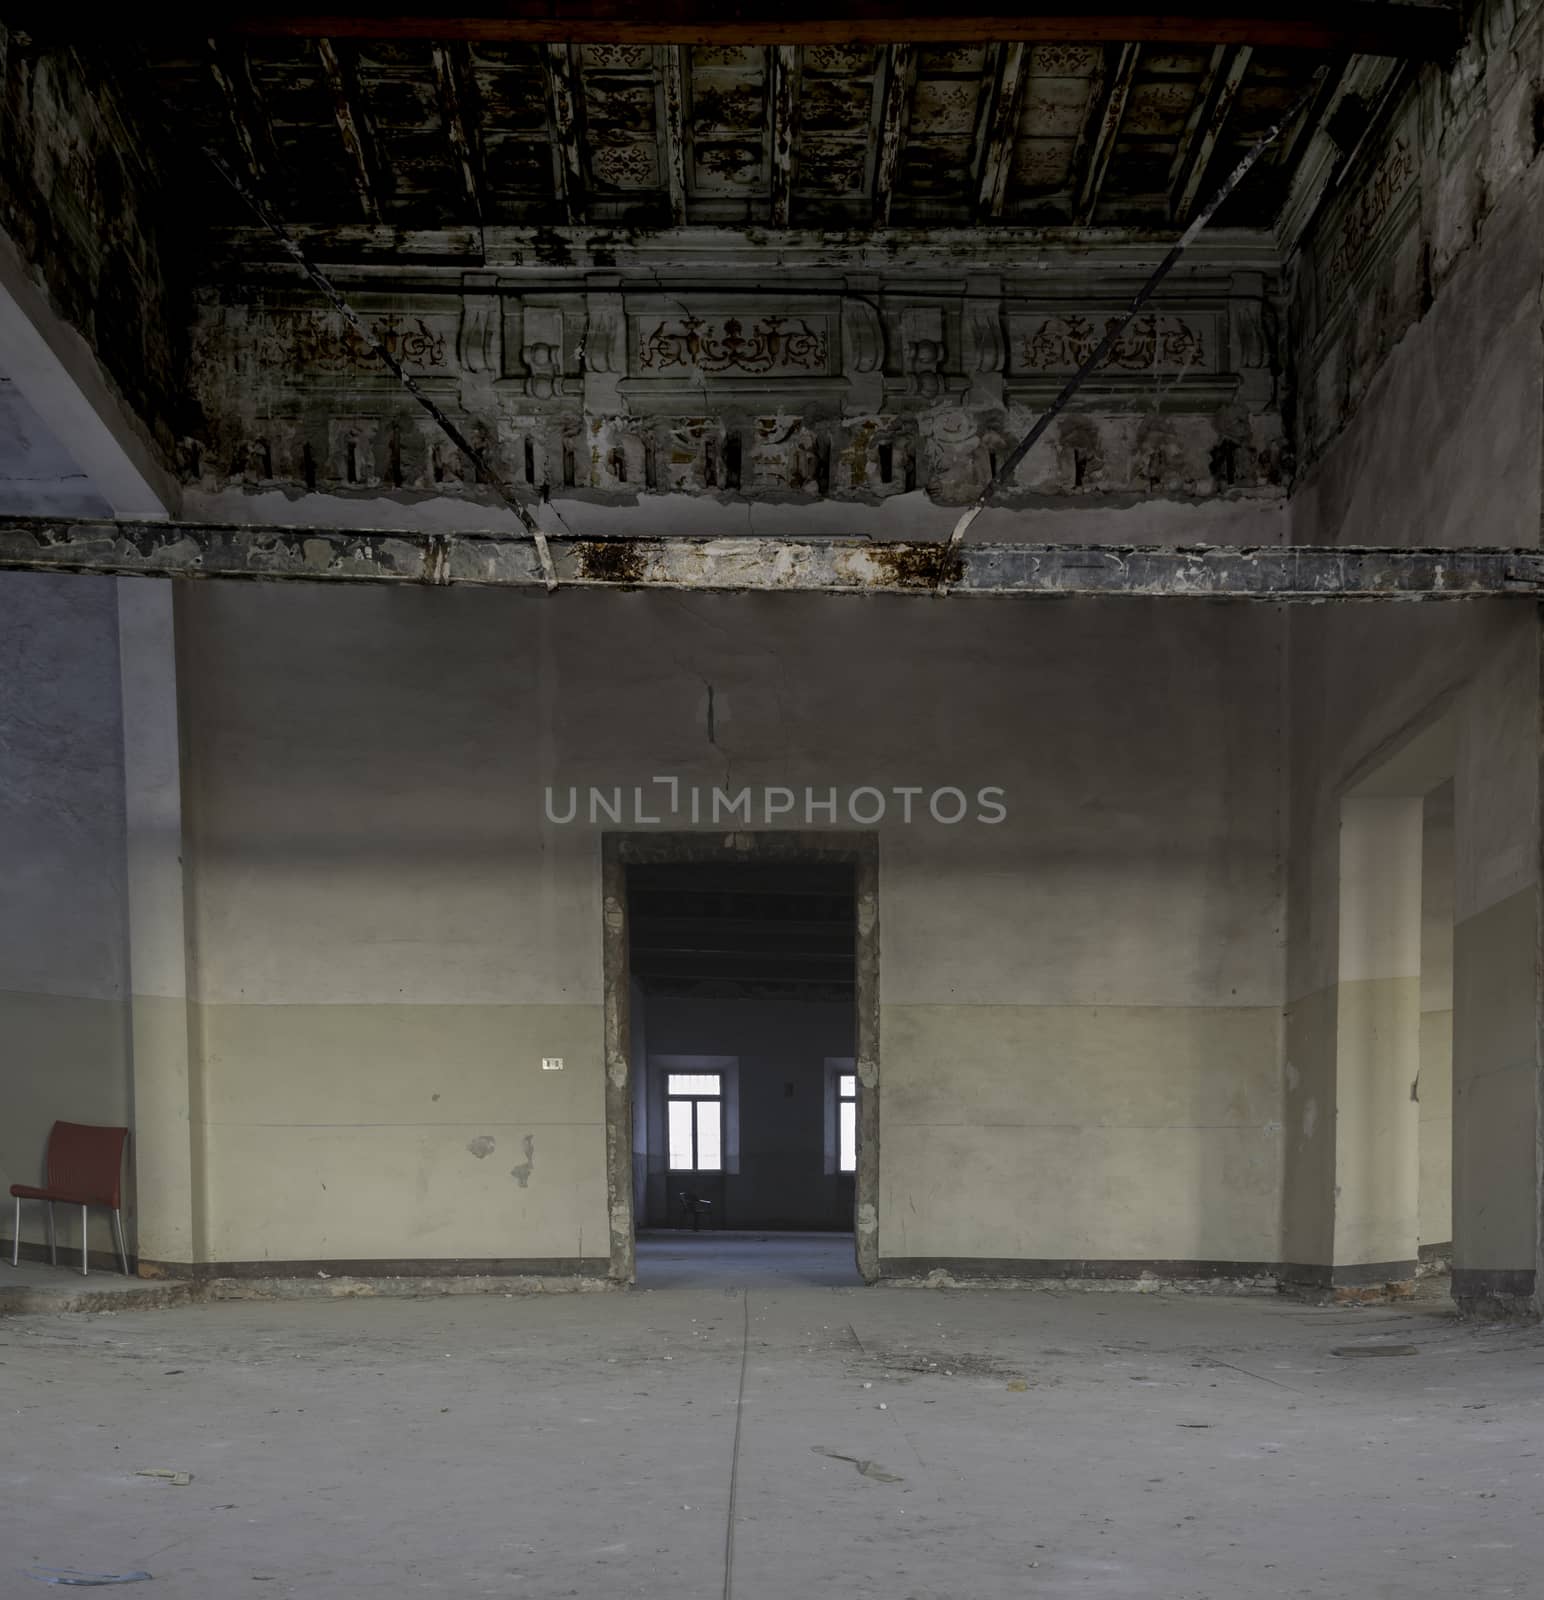 Interiors of an abandoned madhouse in the downtown by enrico.lapponi